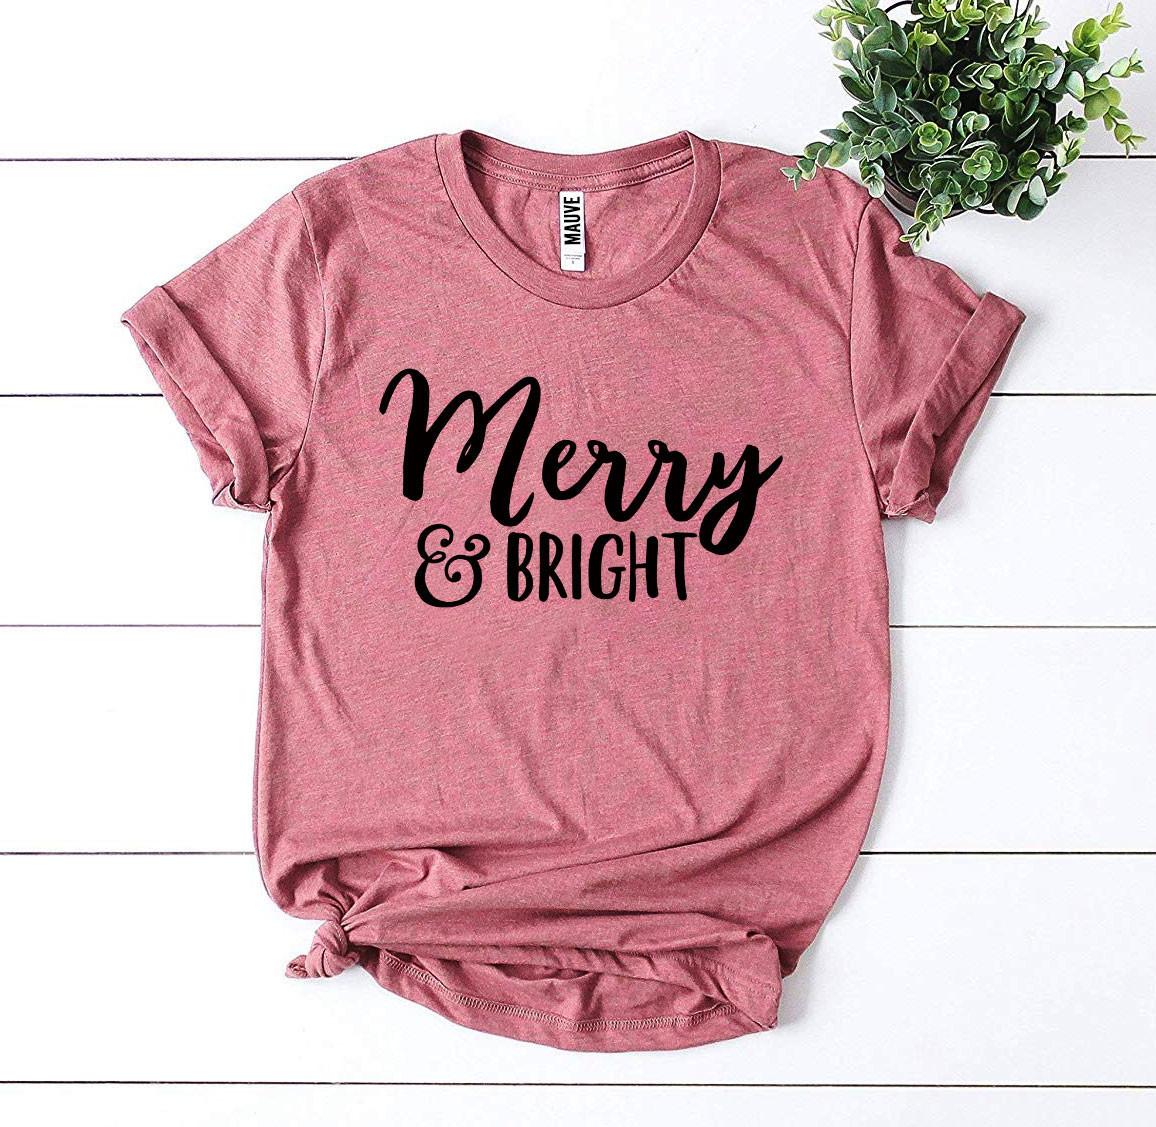 Merry And Bright T-shirt